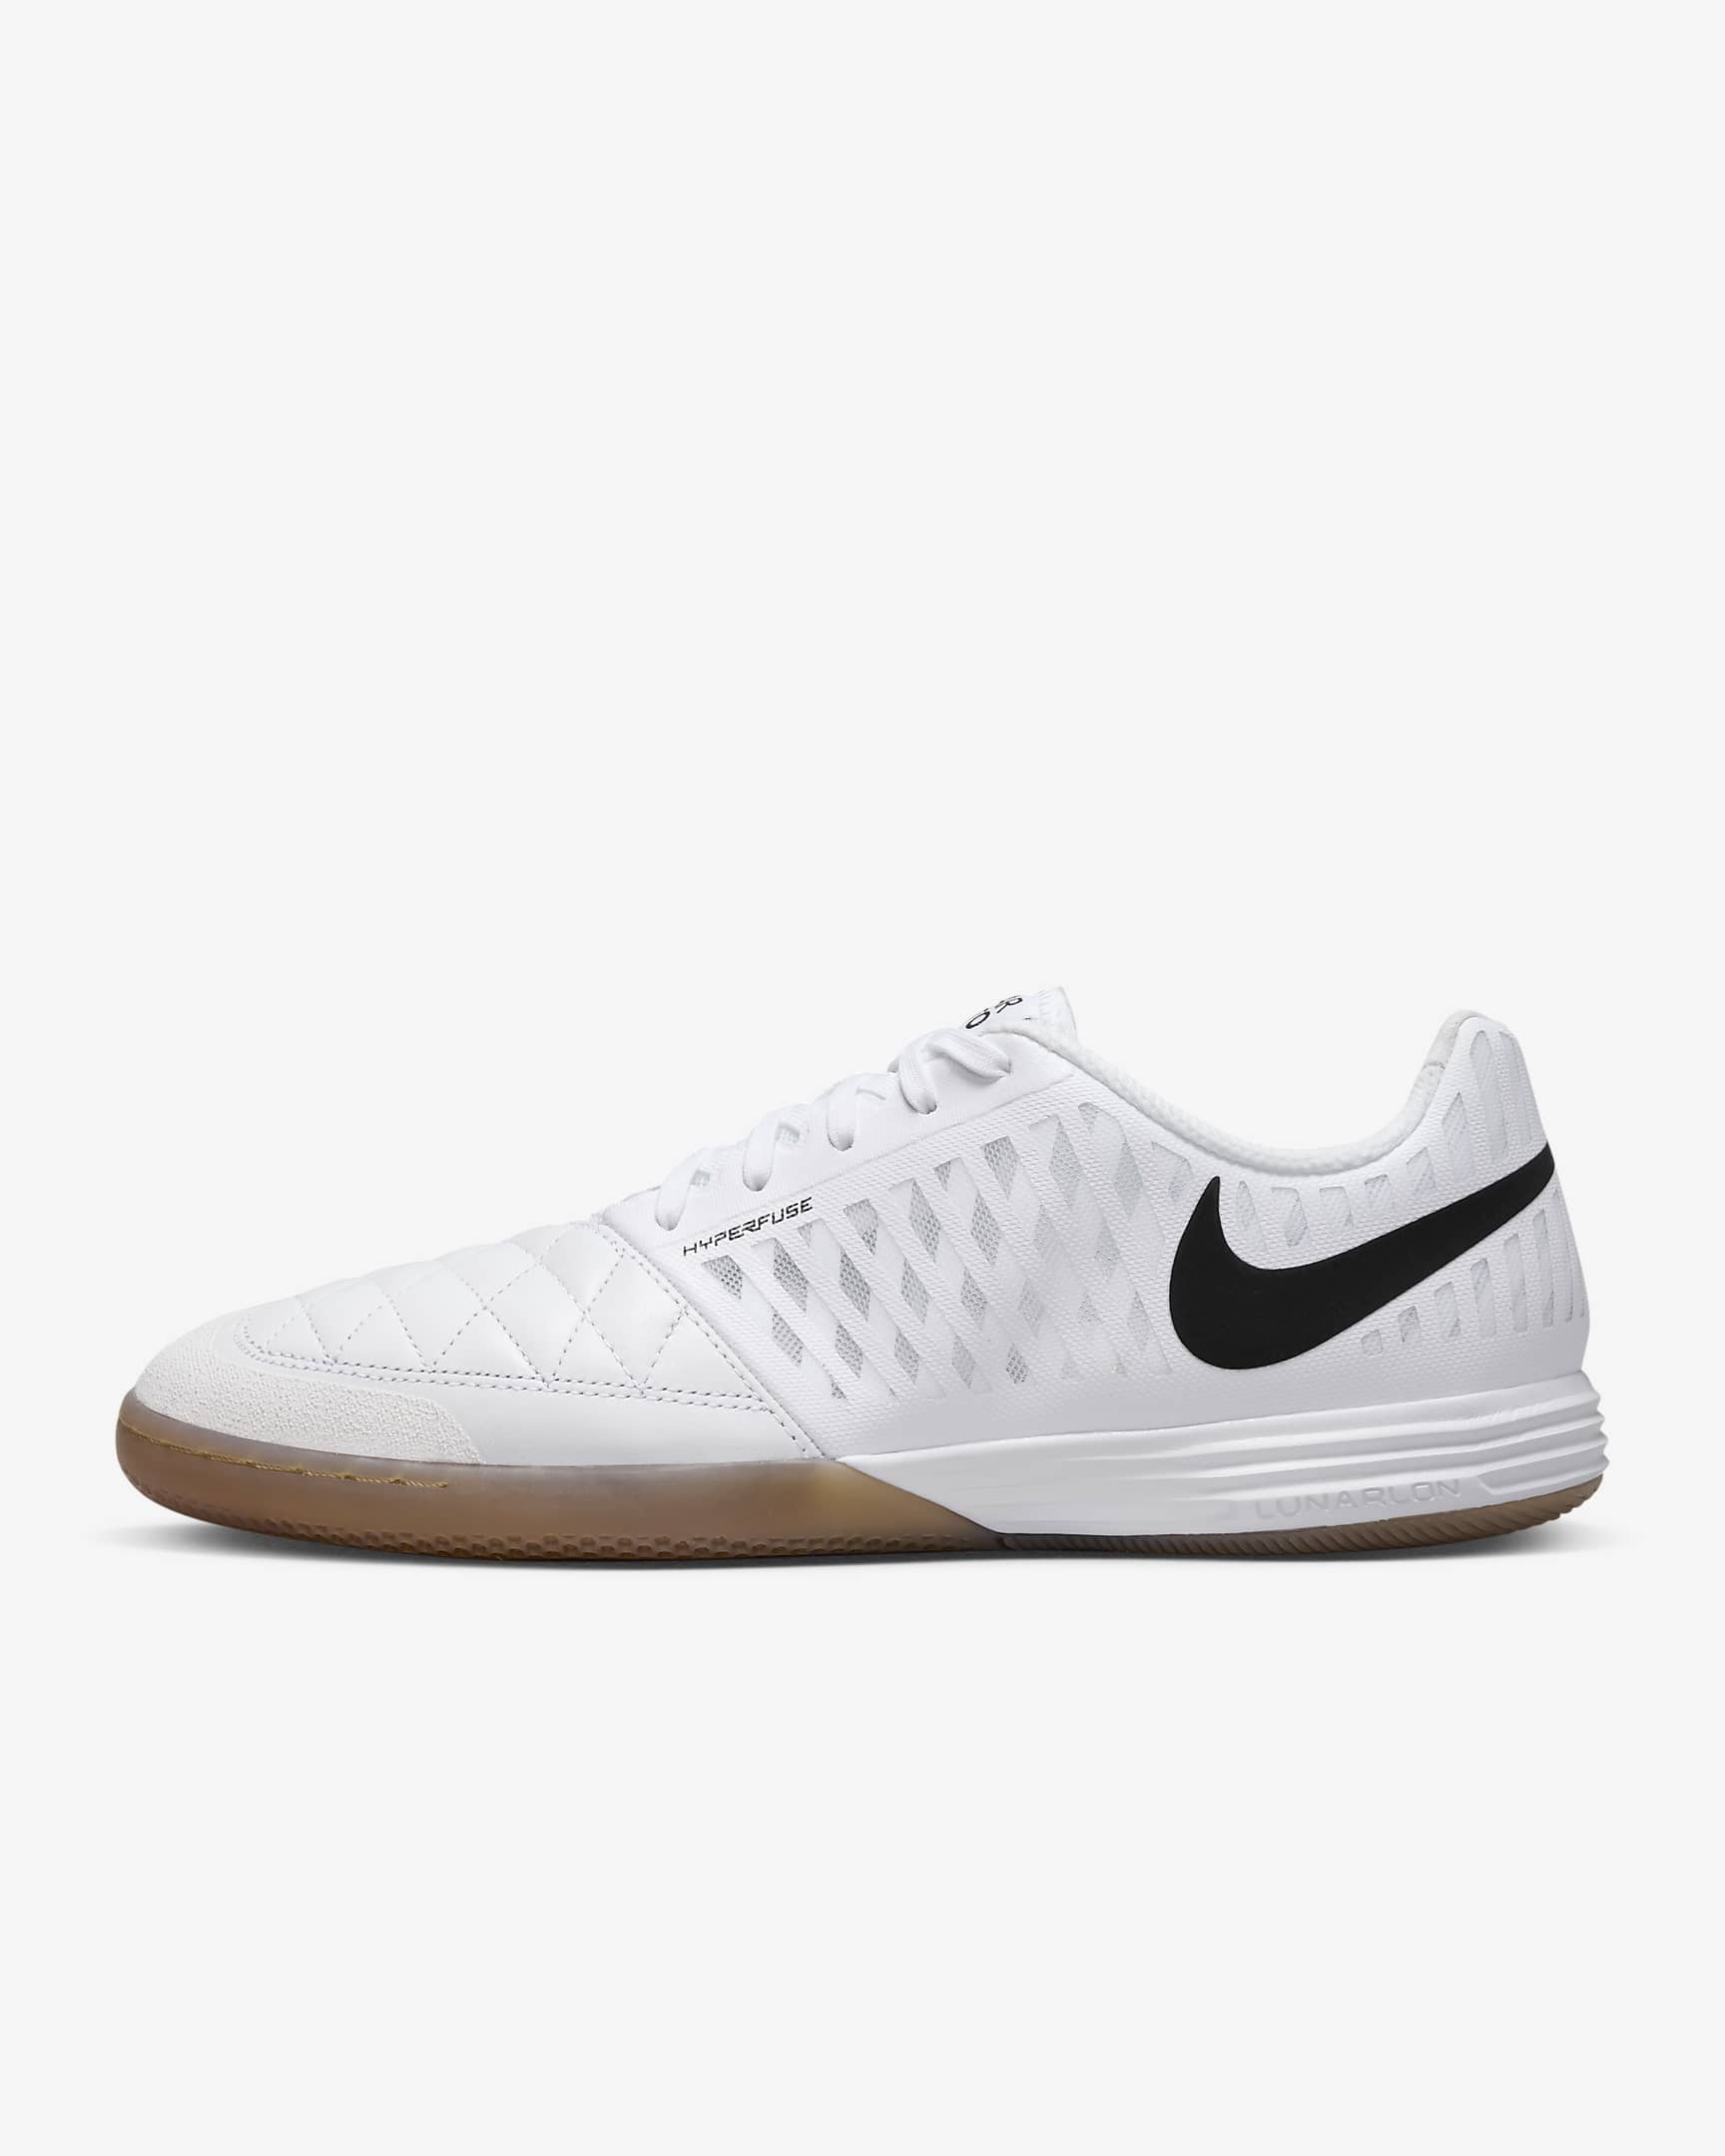 Nike Lunar Gato II Indoor Court Low-Top Football Shoes - White/Gum Light Brown/White